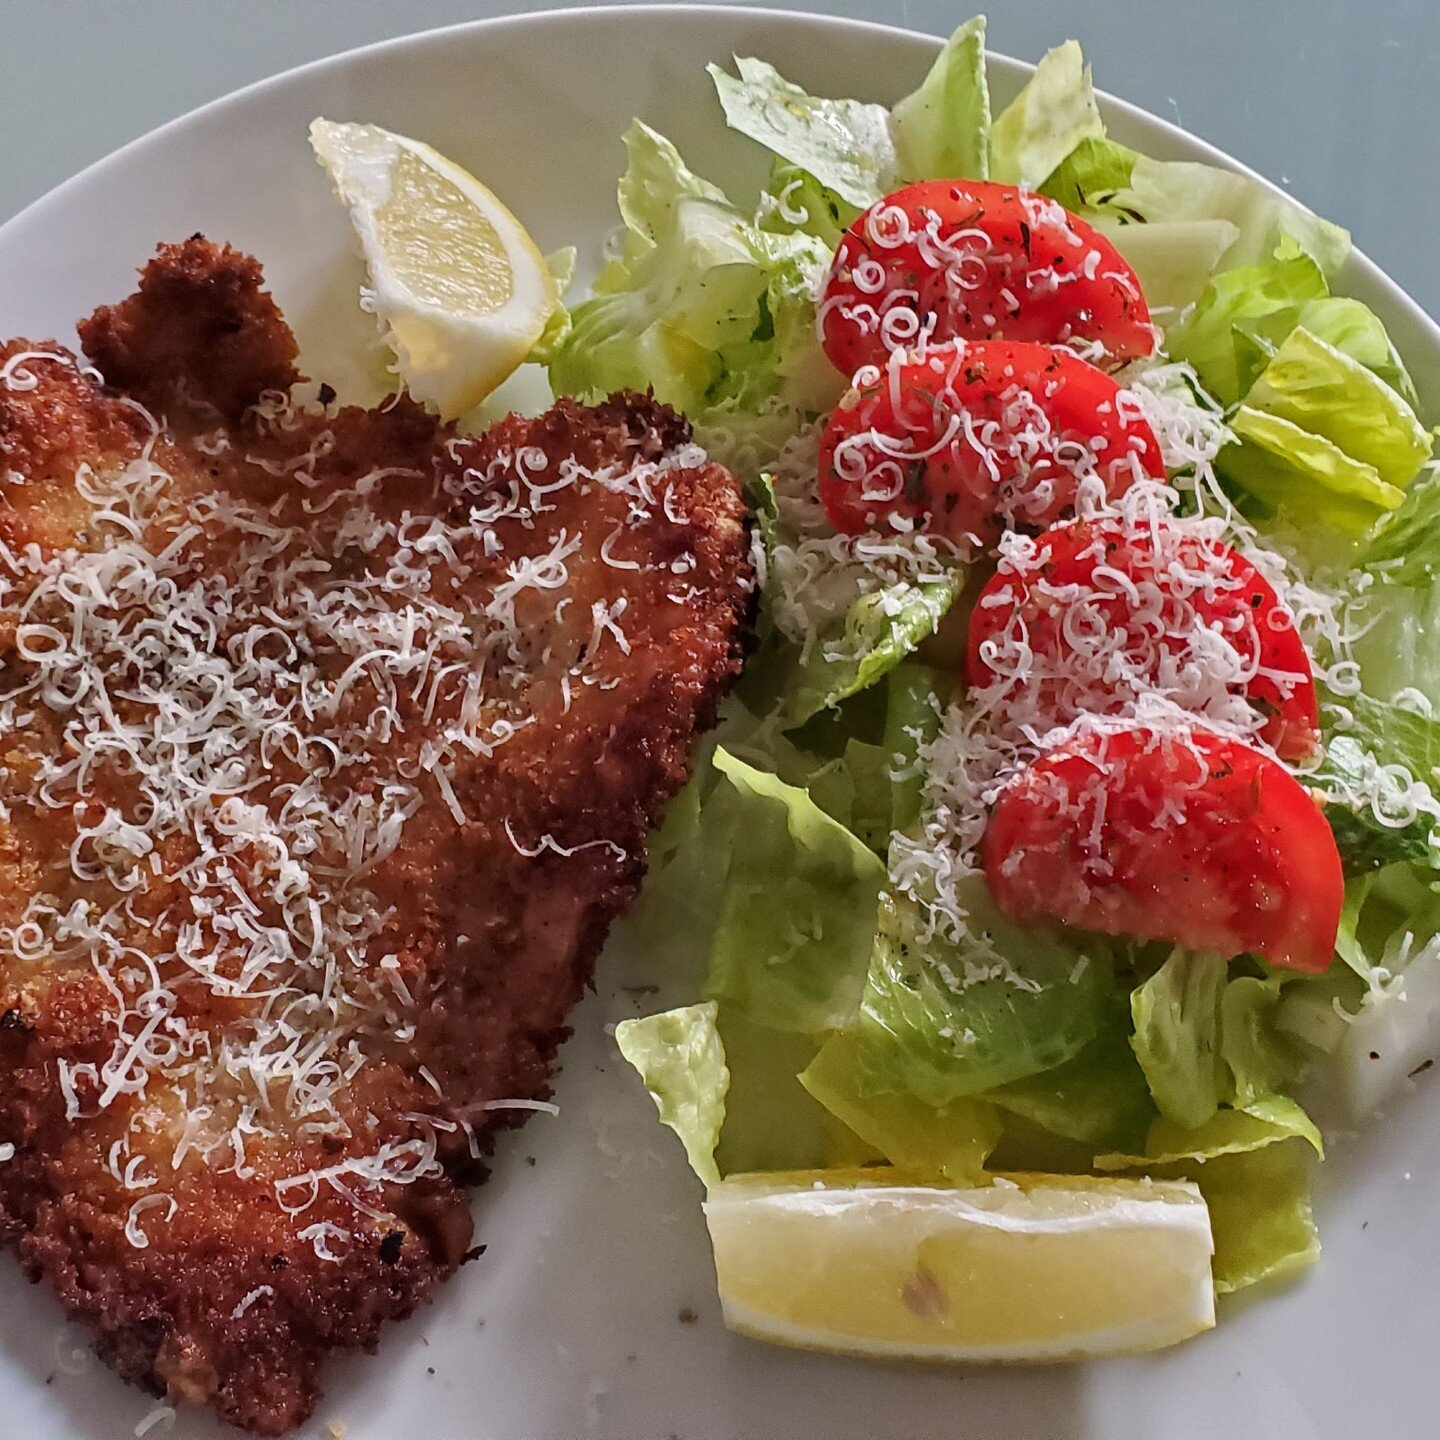 Backyard Blend Milanese?
Pounded flat pork chop or chicken breast, dusted in flower, dipped in egg bath, dredged in panko Backyard Blend mix. Just lemon and Backyard Blend and olive oil on the salad!